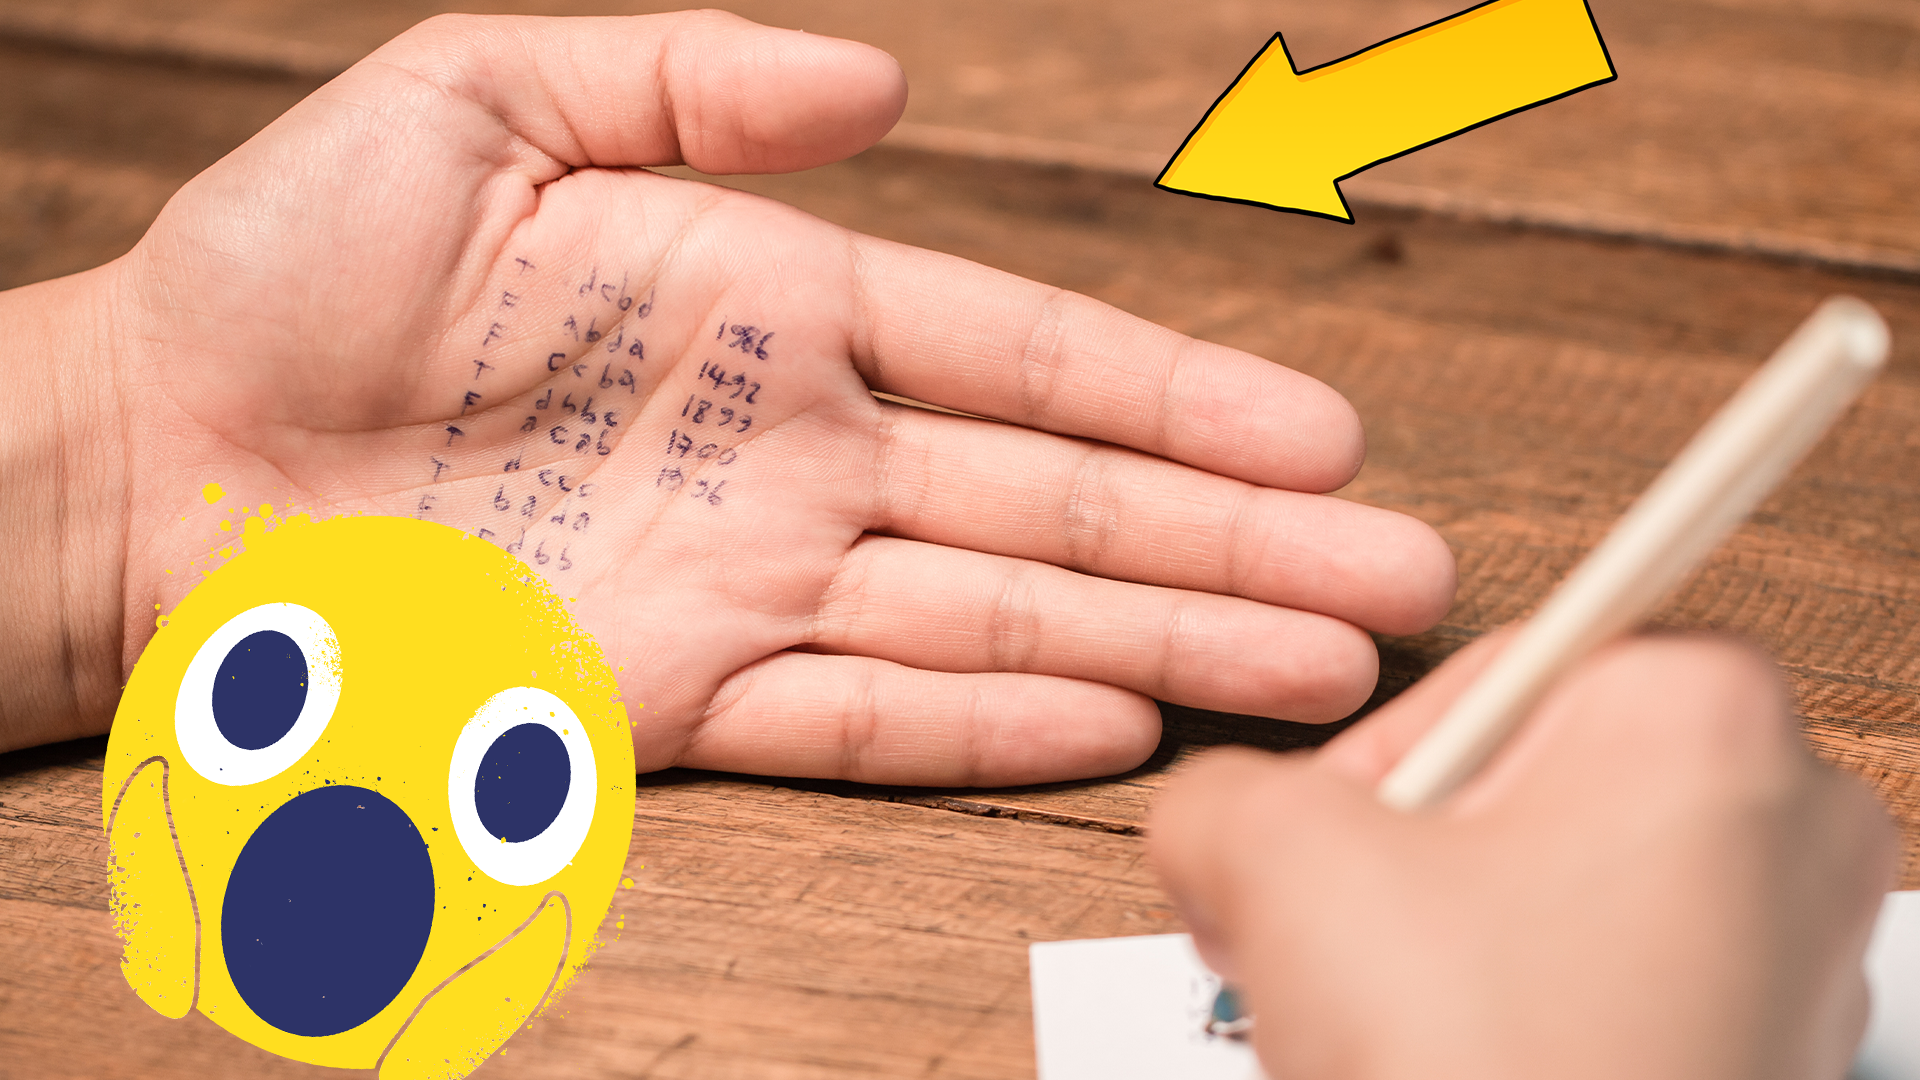 Someone writing with writing on their hand and a shocked emoji